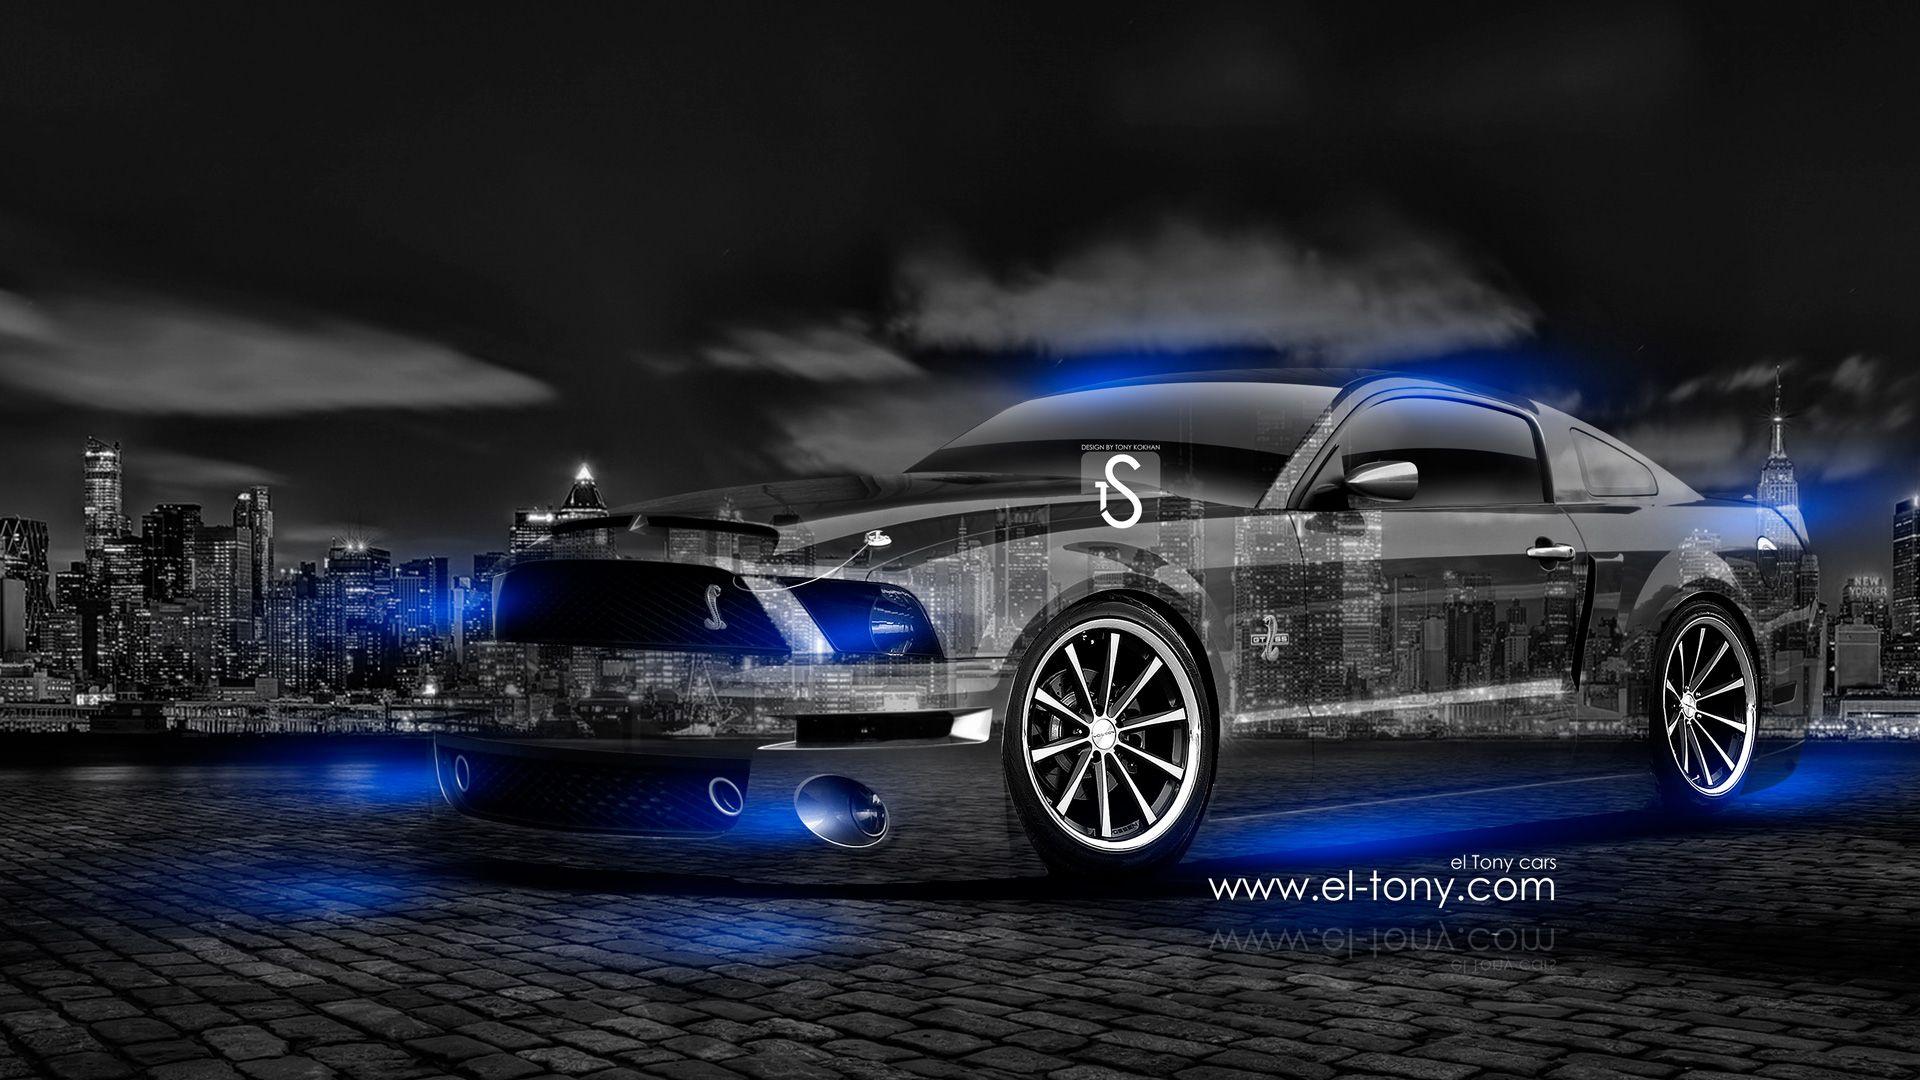 Cool Muscle Car Wallpaper 46 with Cool Muscle Car Wallpaper